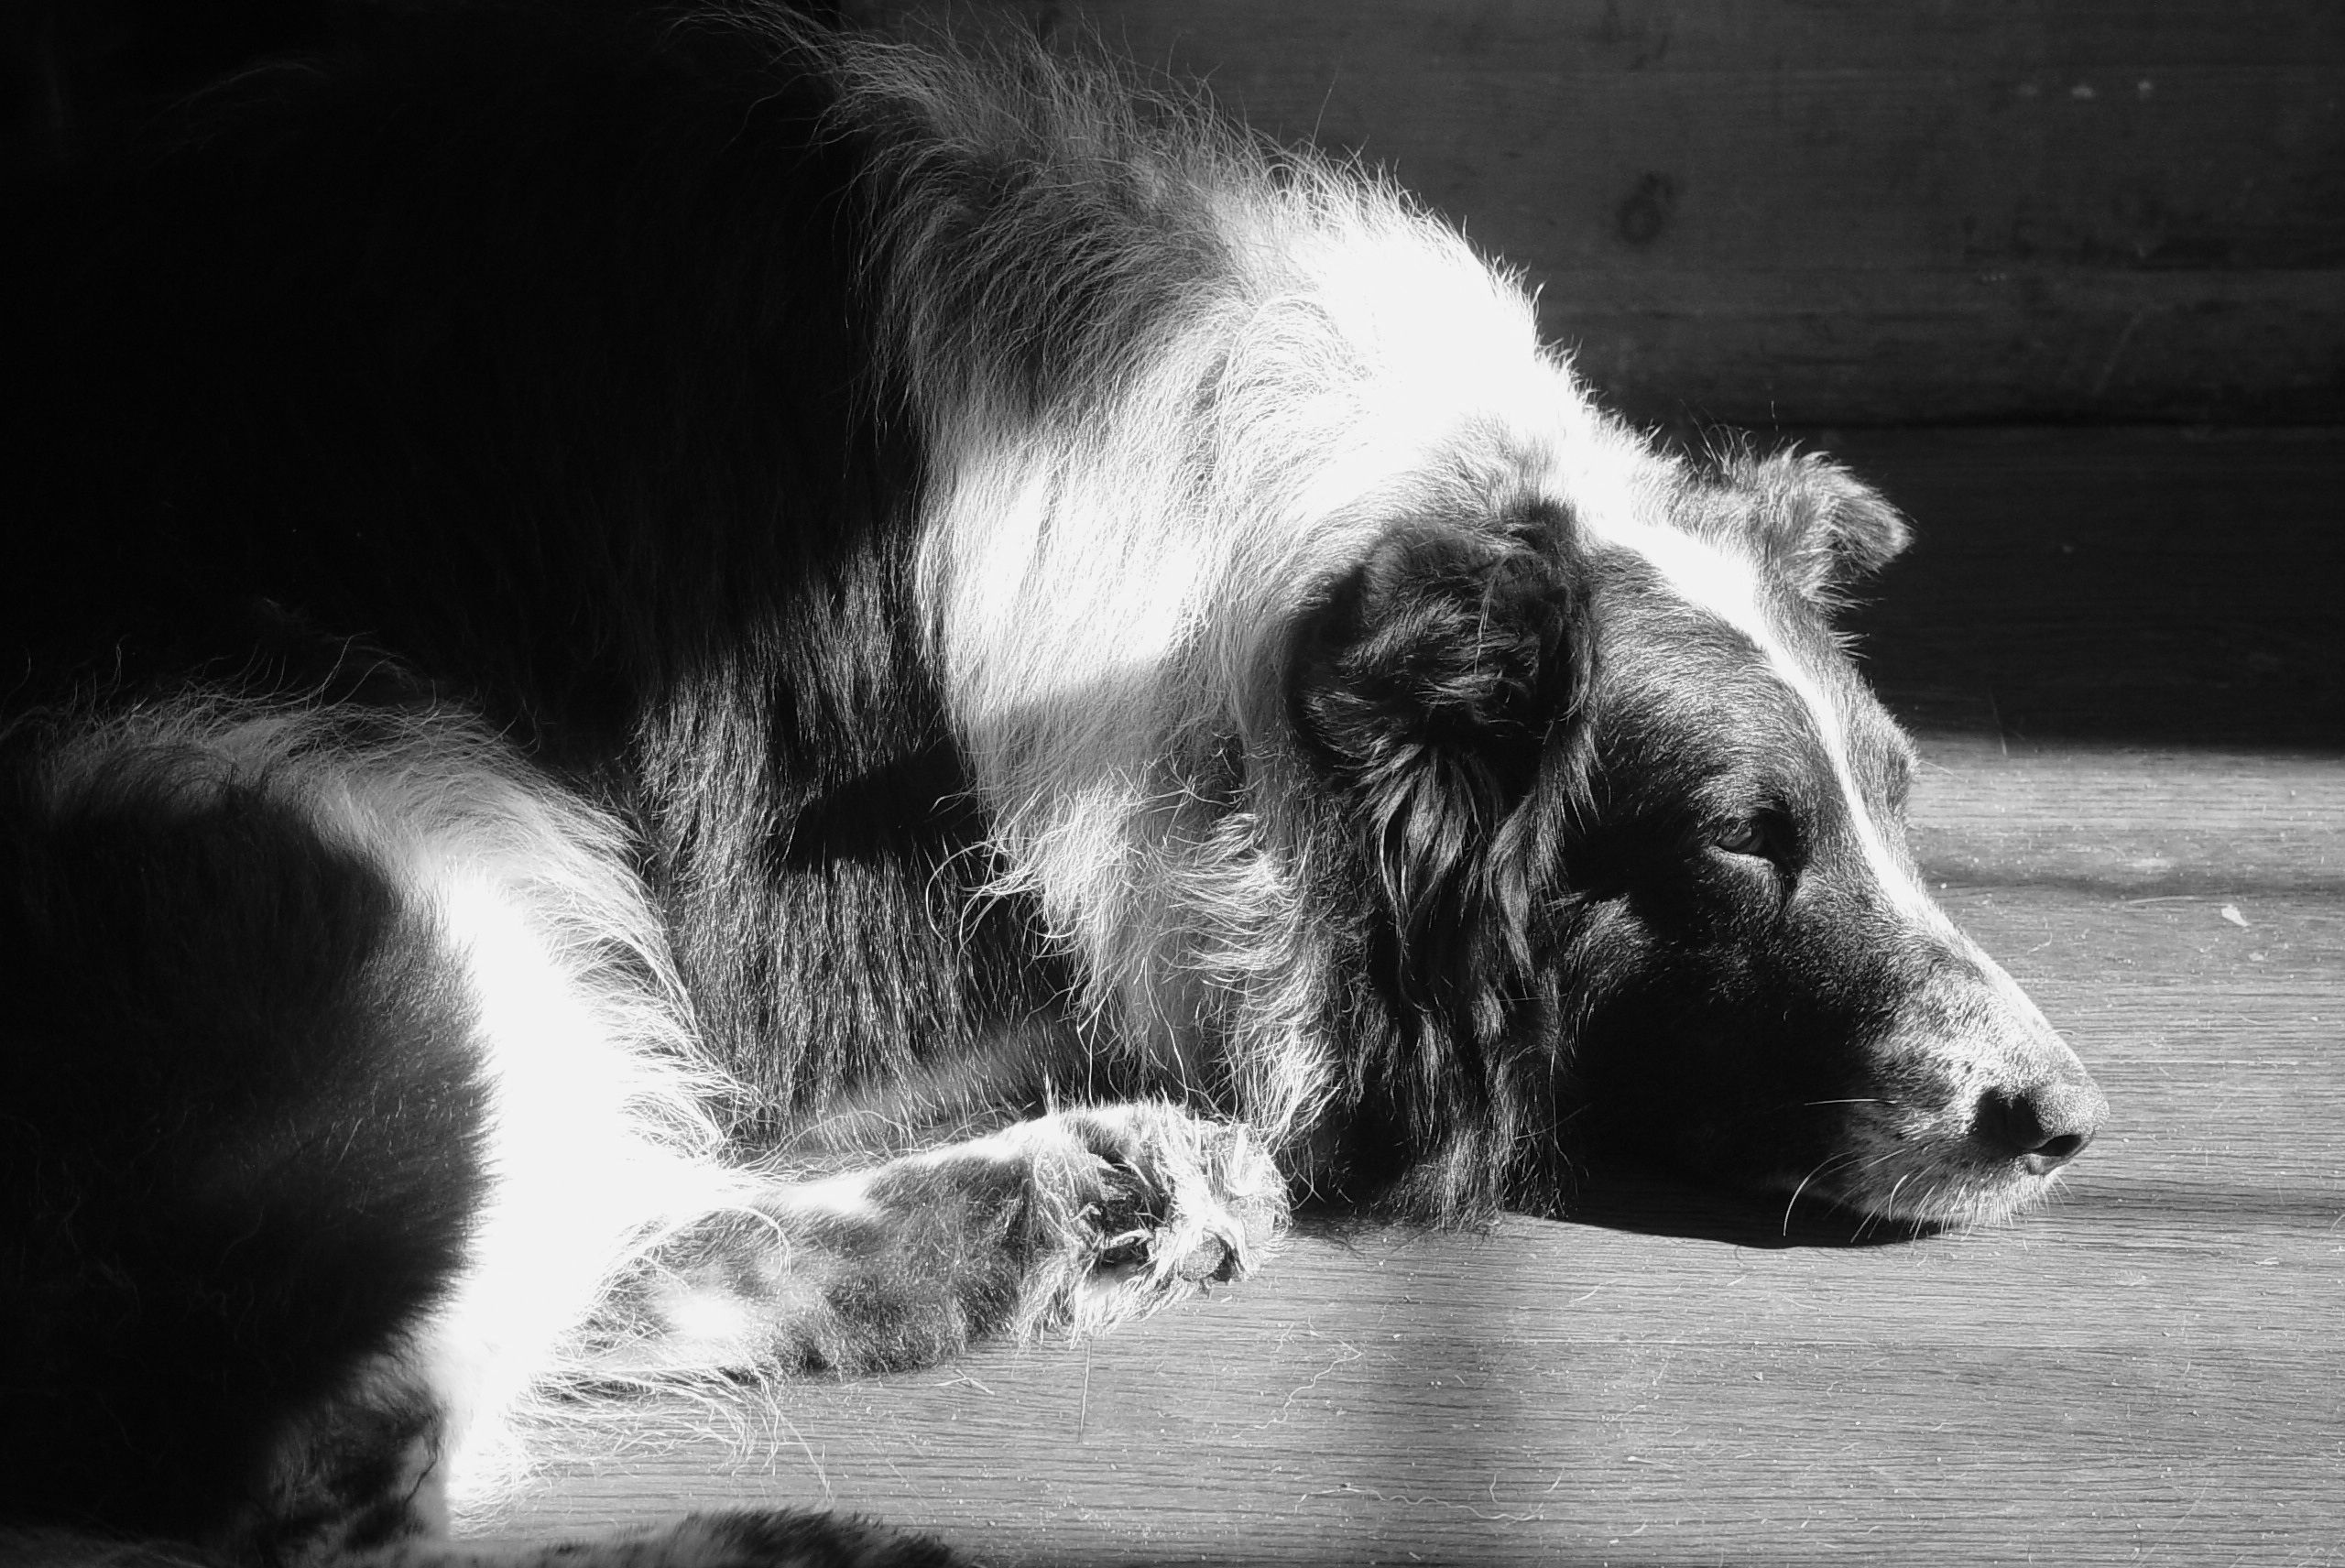 Resting Old Time Farm Shepherd dog photo and wallpaper. Beautiful Resting Old Time Farm Shepherd dog pictures